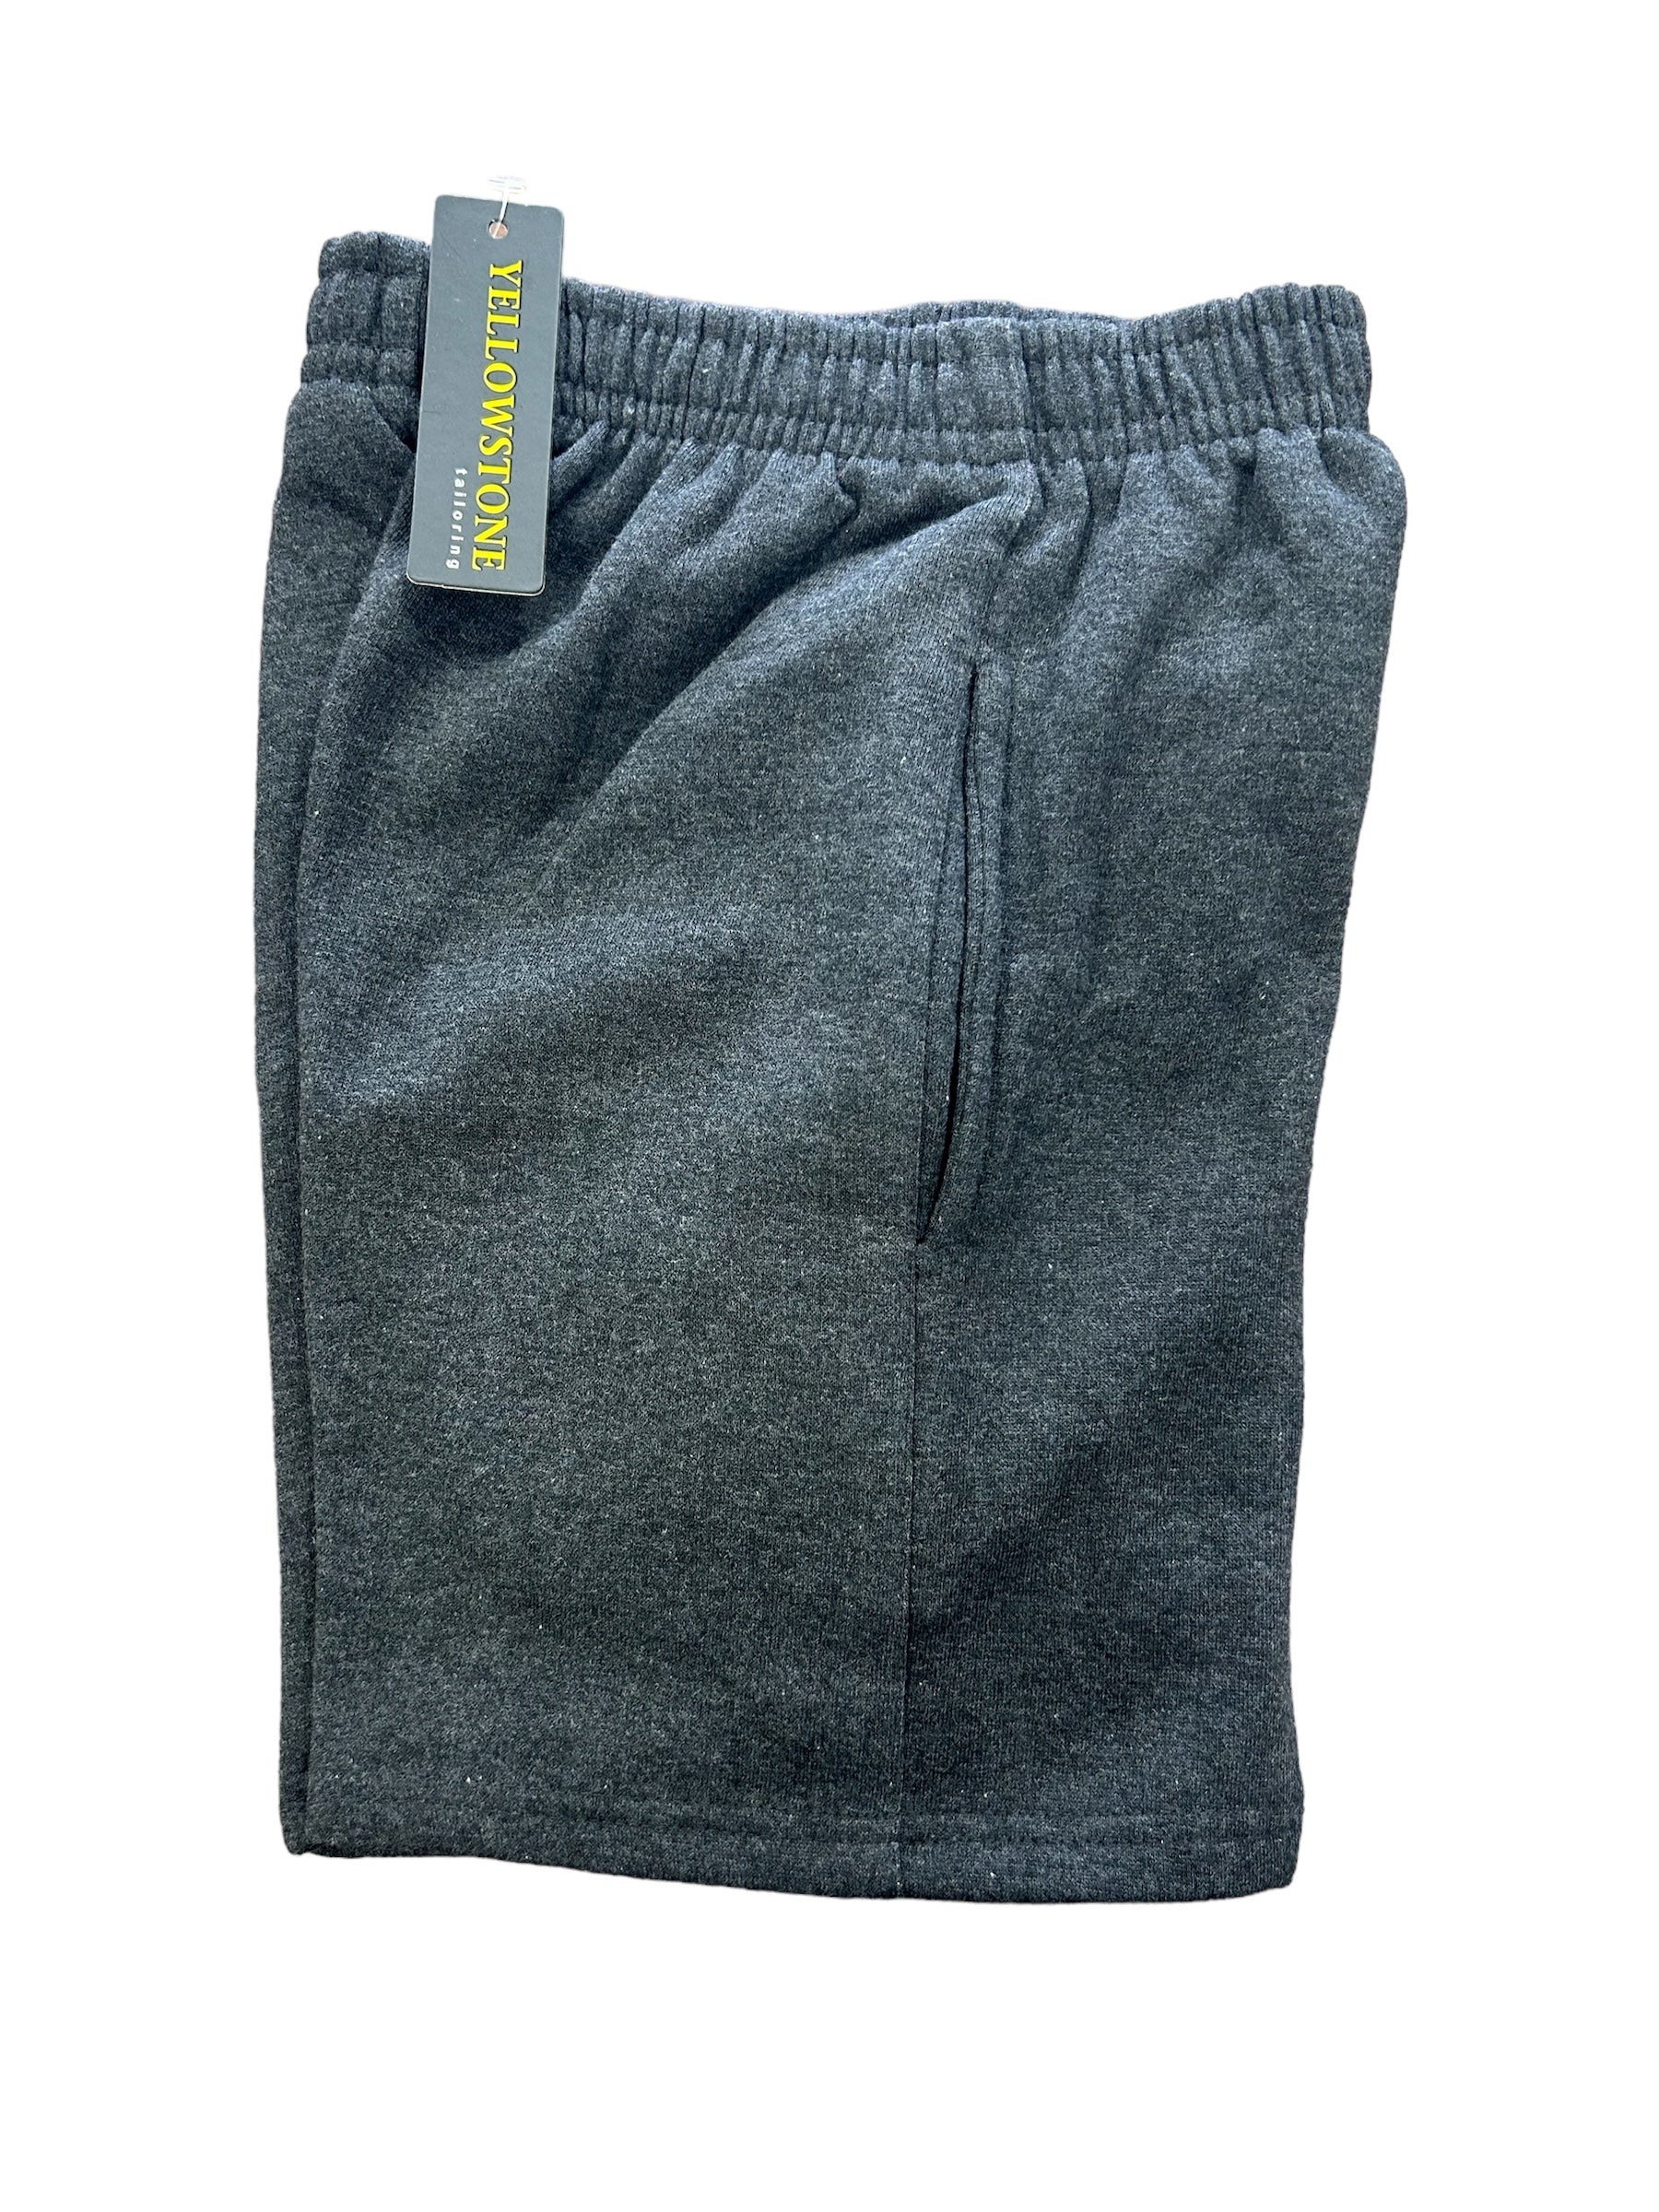 St. Patrick’s Diswellstown Tracksuit Shorts